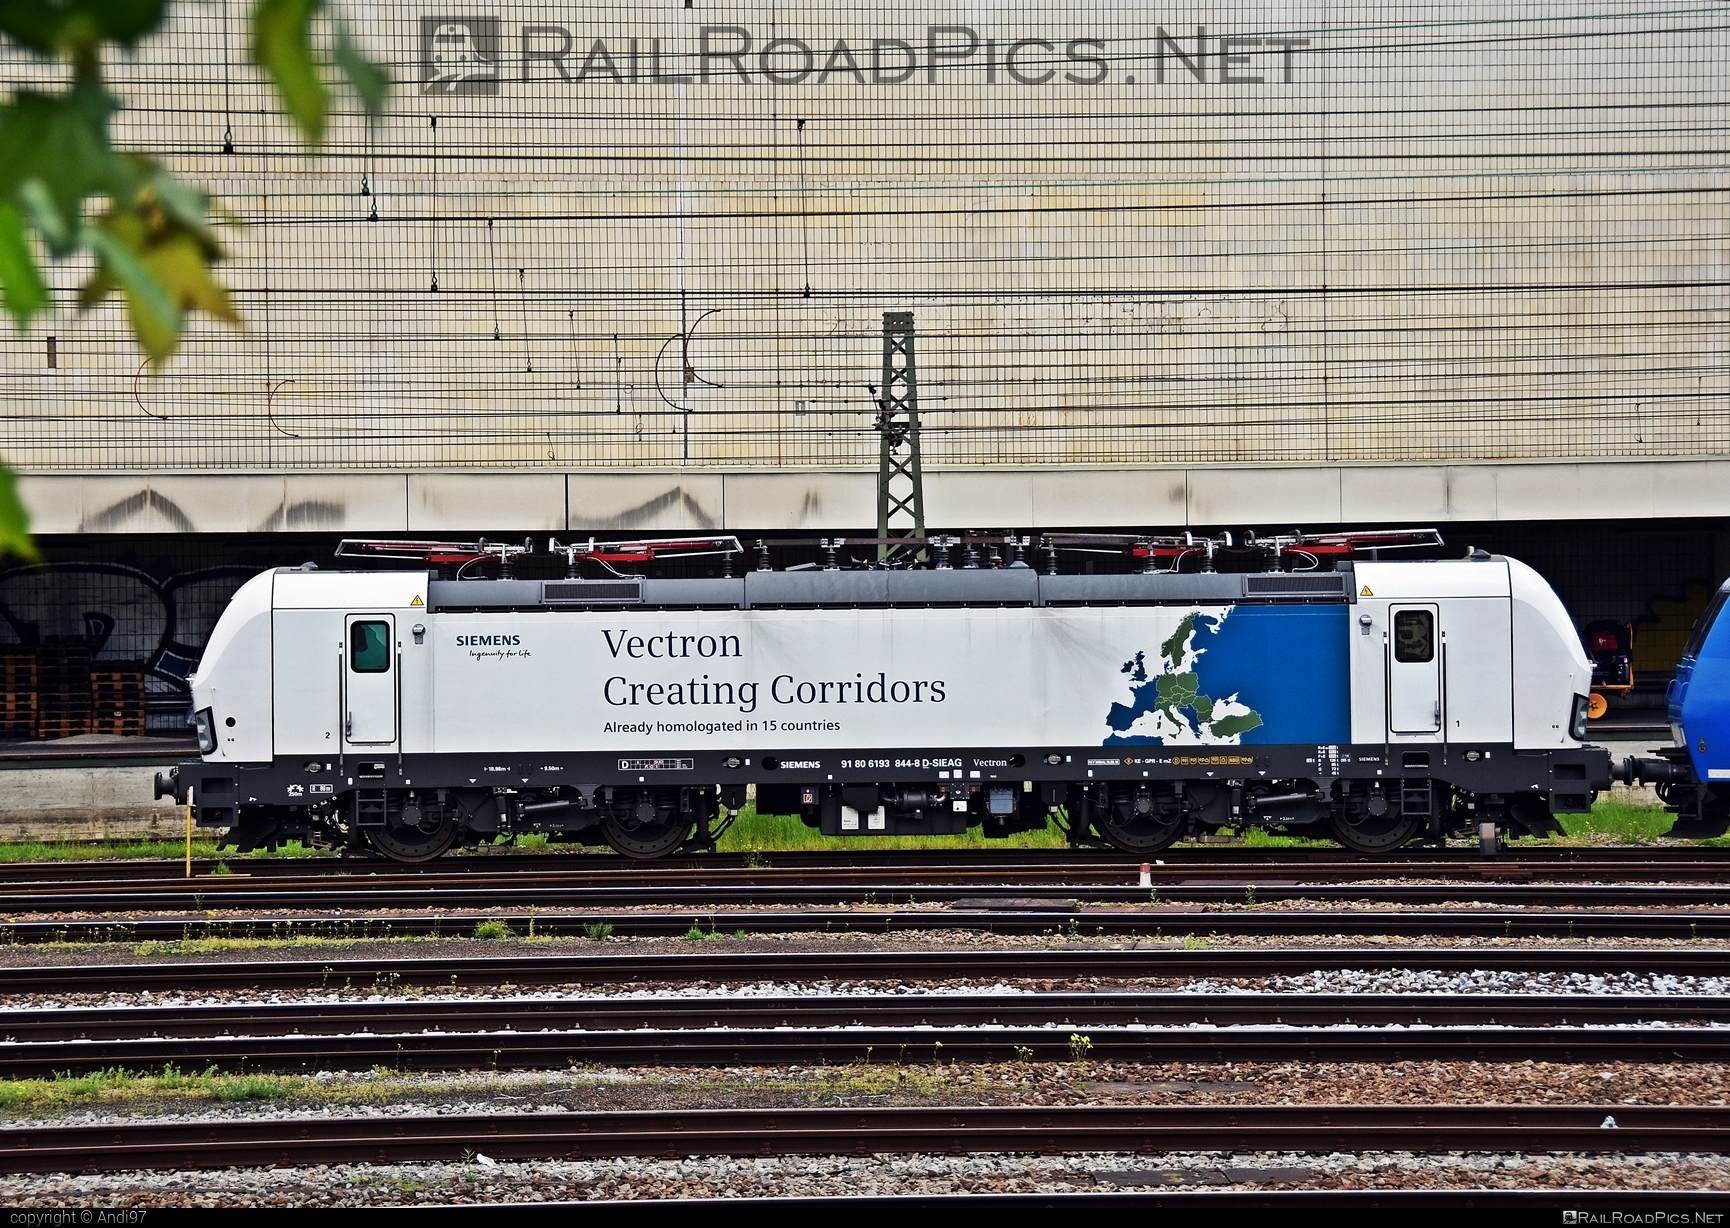 Siemens Vectron MS - 193 844 operated by Siemens Mobility GmbH #SiemensMobility #SiemensMobilityGmbH #sieag #siemens #siemensVectron #siemensVectronMS #vectron #vectronMS